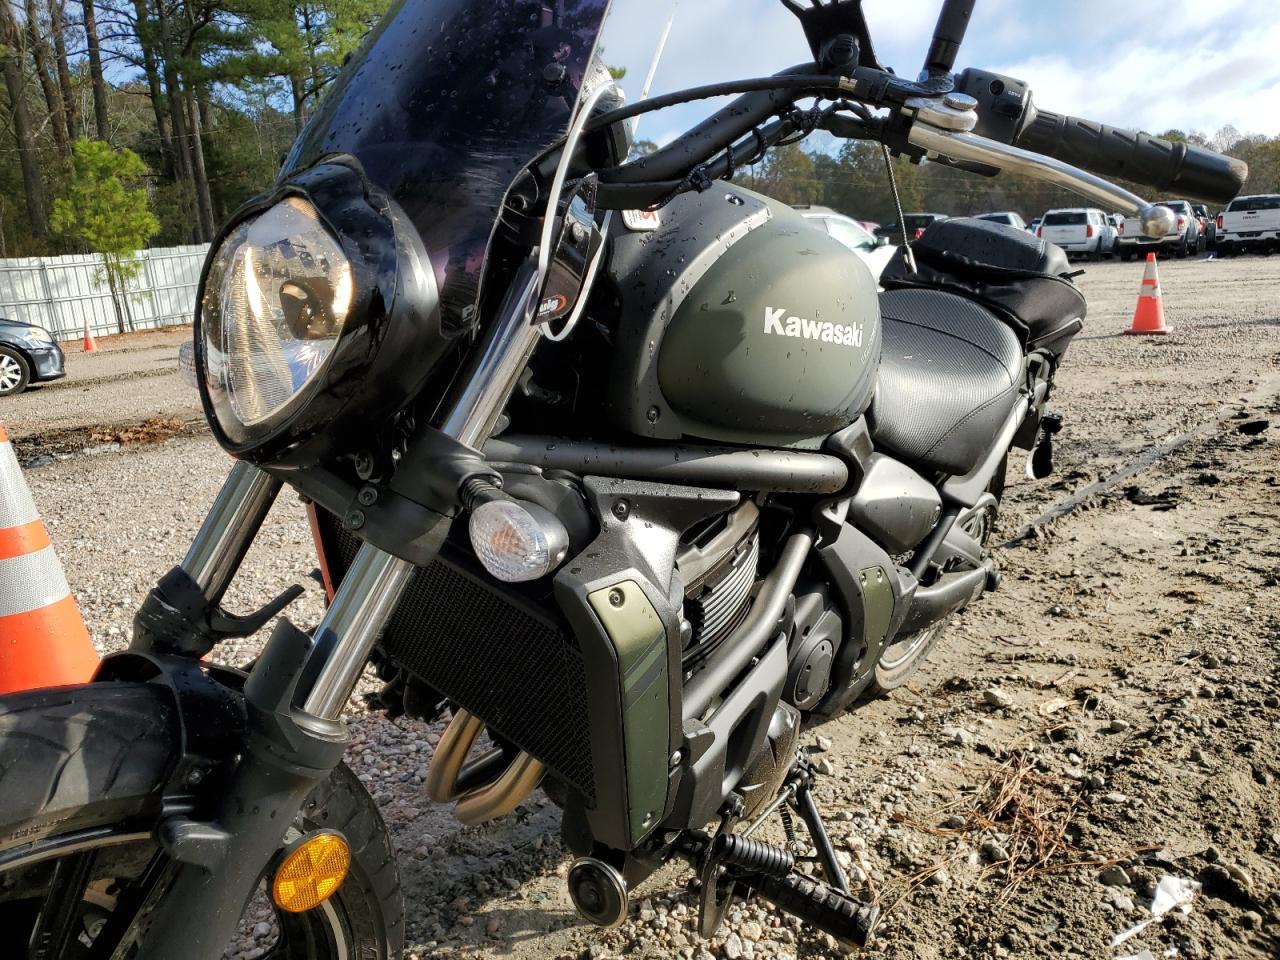 2019 Kawasaki EN650 C for sale at Copart Knightdale, NC. Lot 